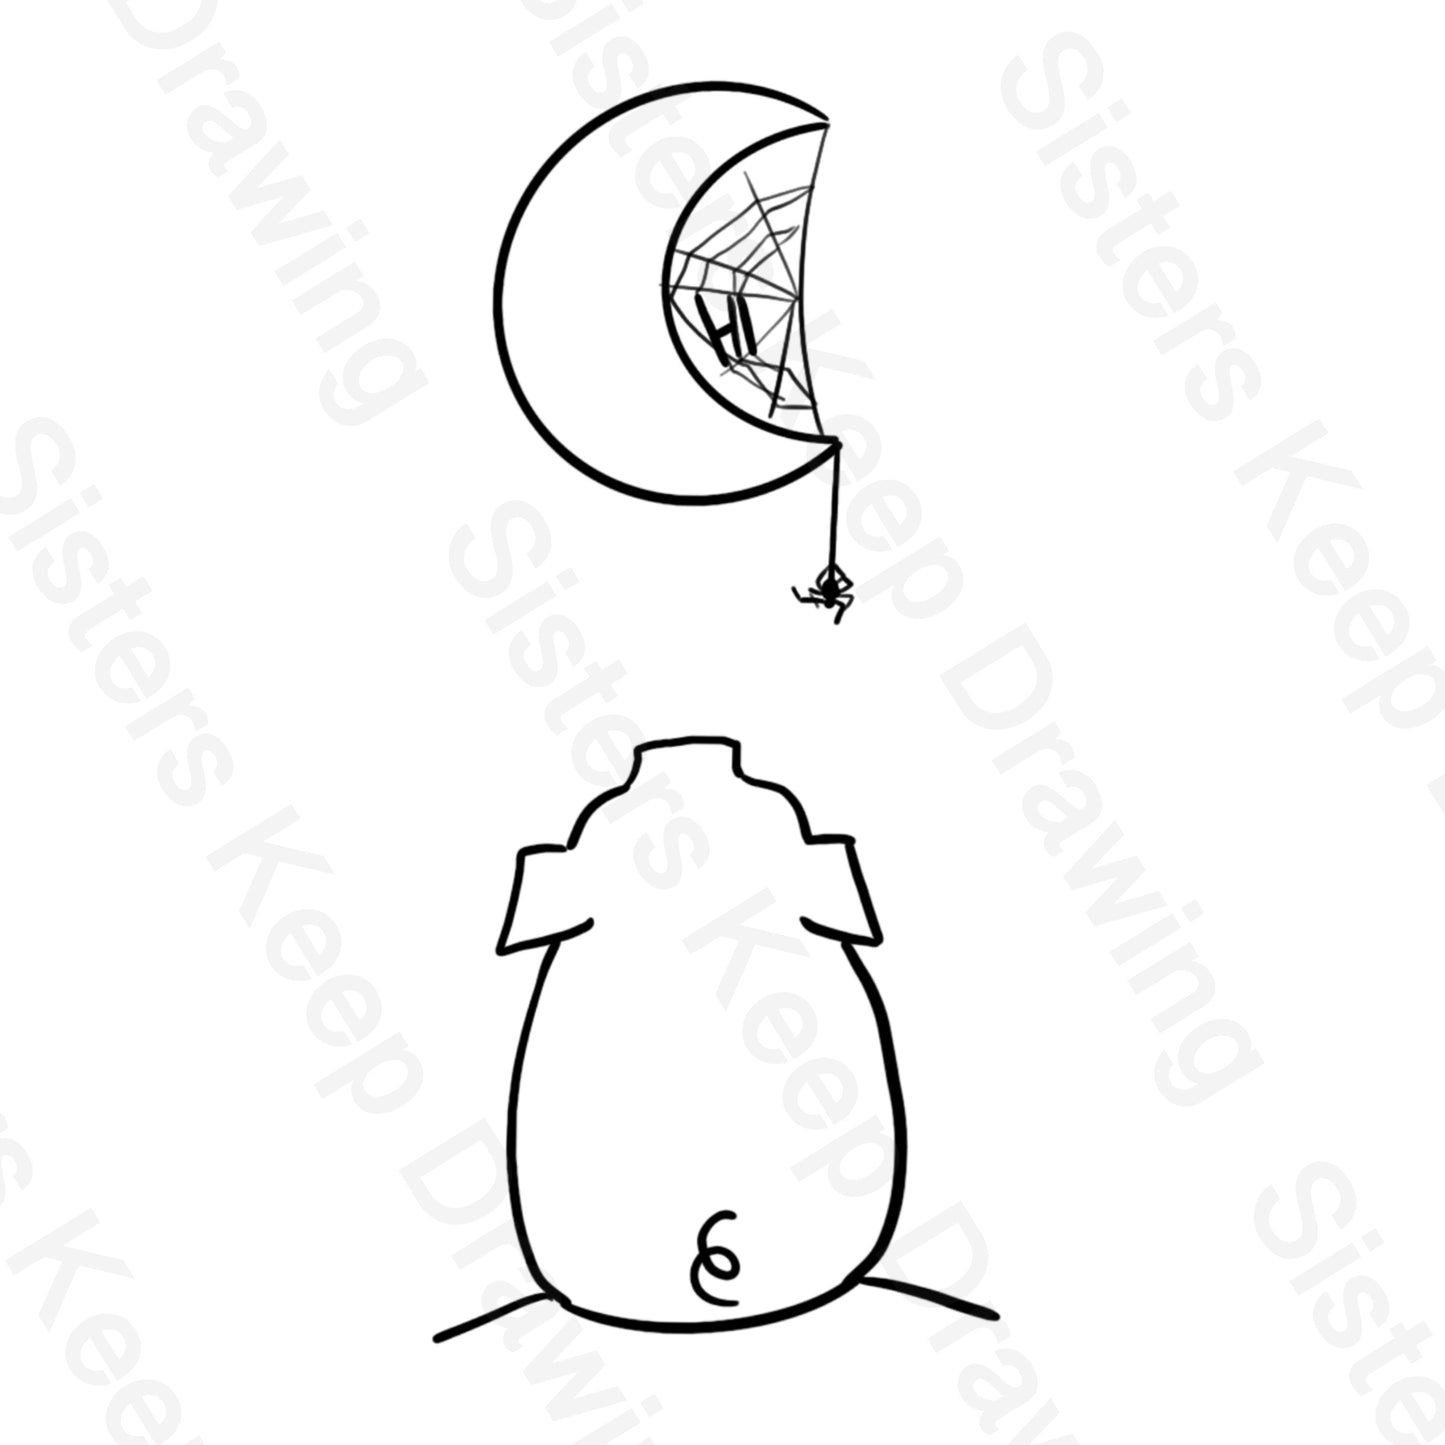 Wilbur Looking for Charlotte in the Moon- Tattoo Transparent Permission PNG